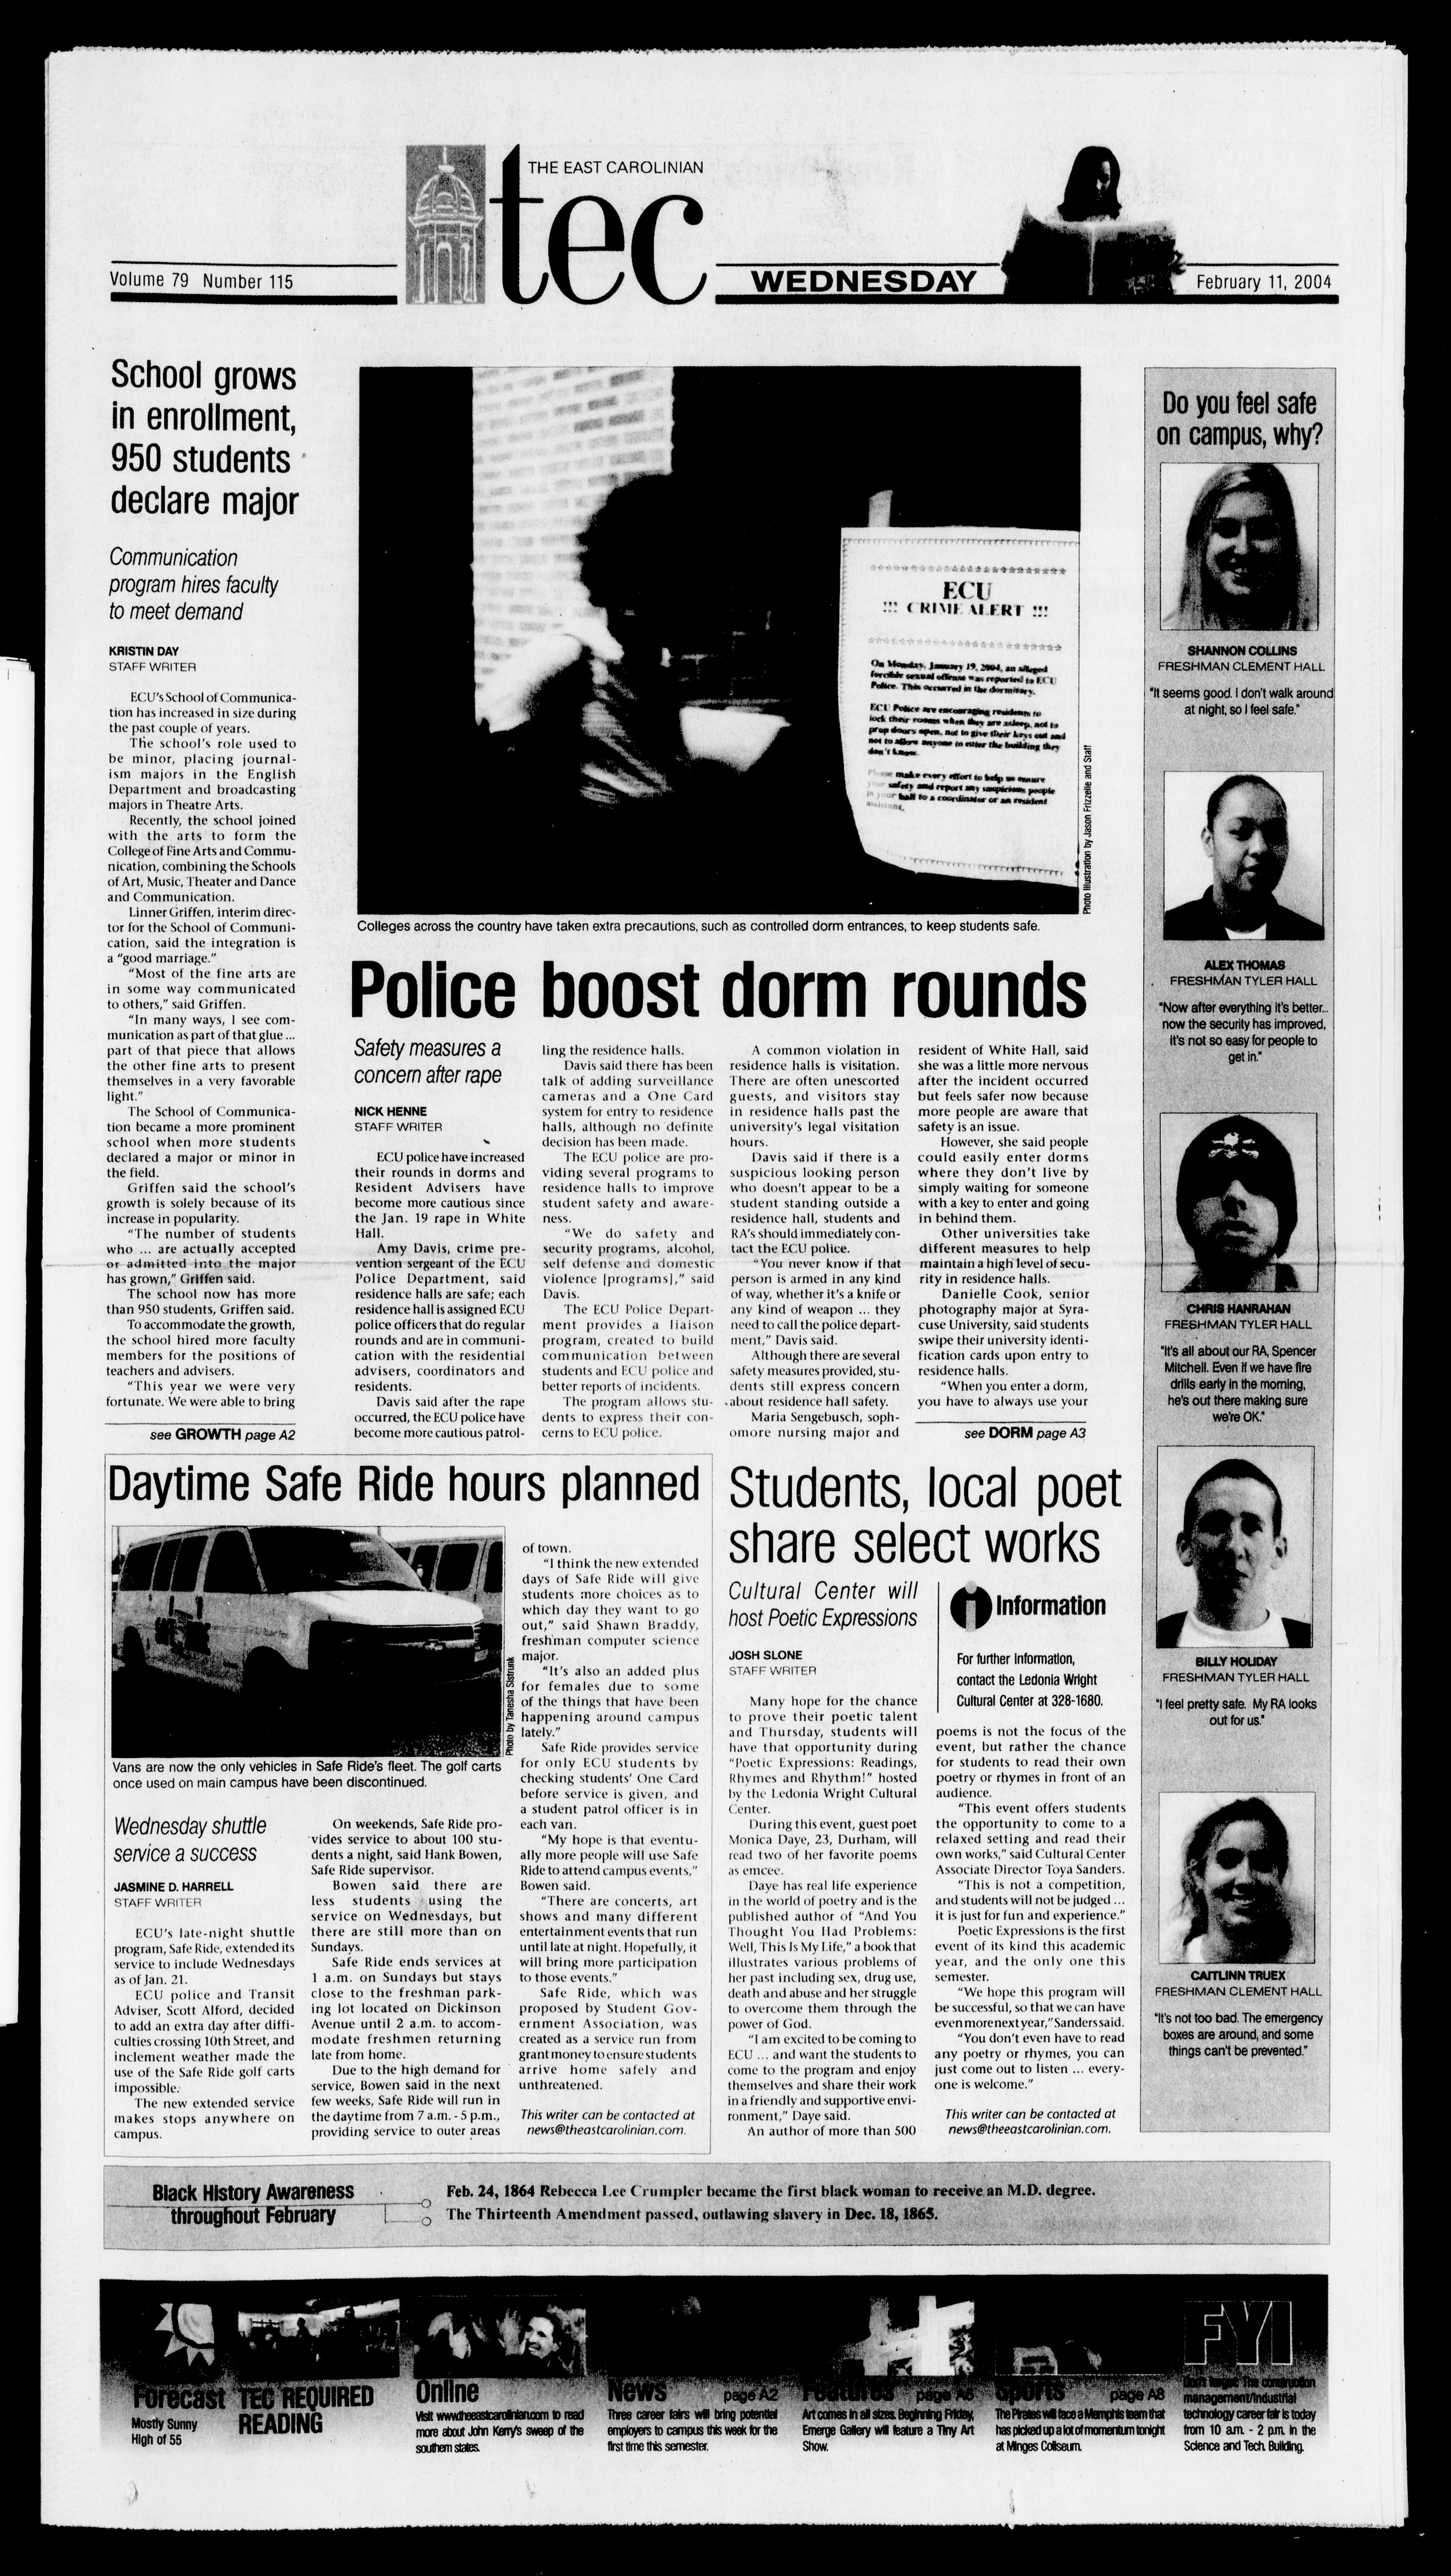 The East Carolinian, February 11, 2004 picture